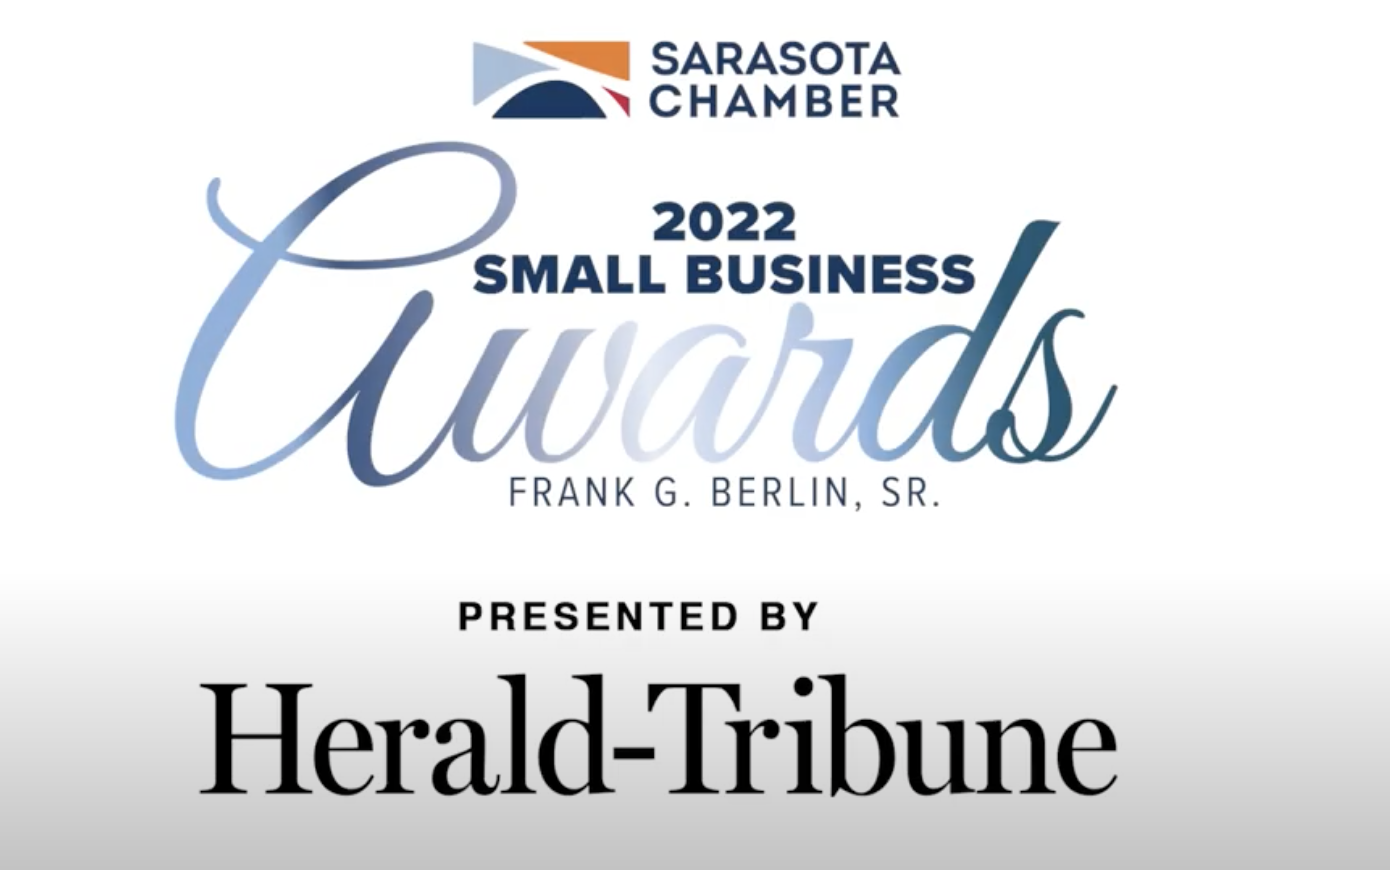 Sarasota Chamber of Commerce 2022 Small Business Awards